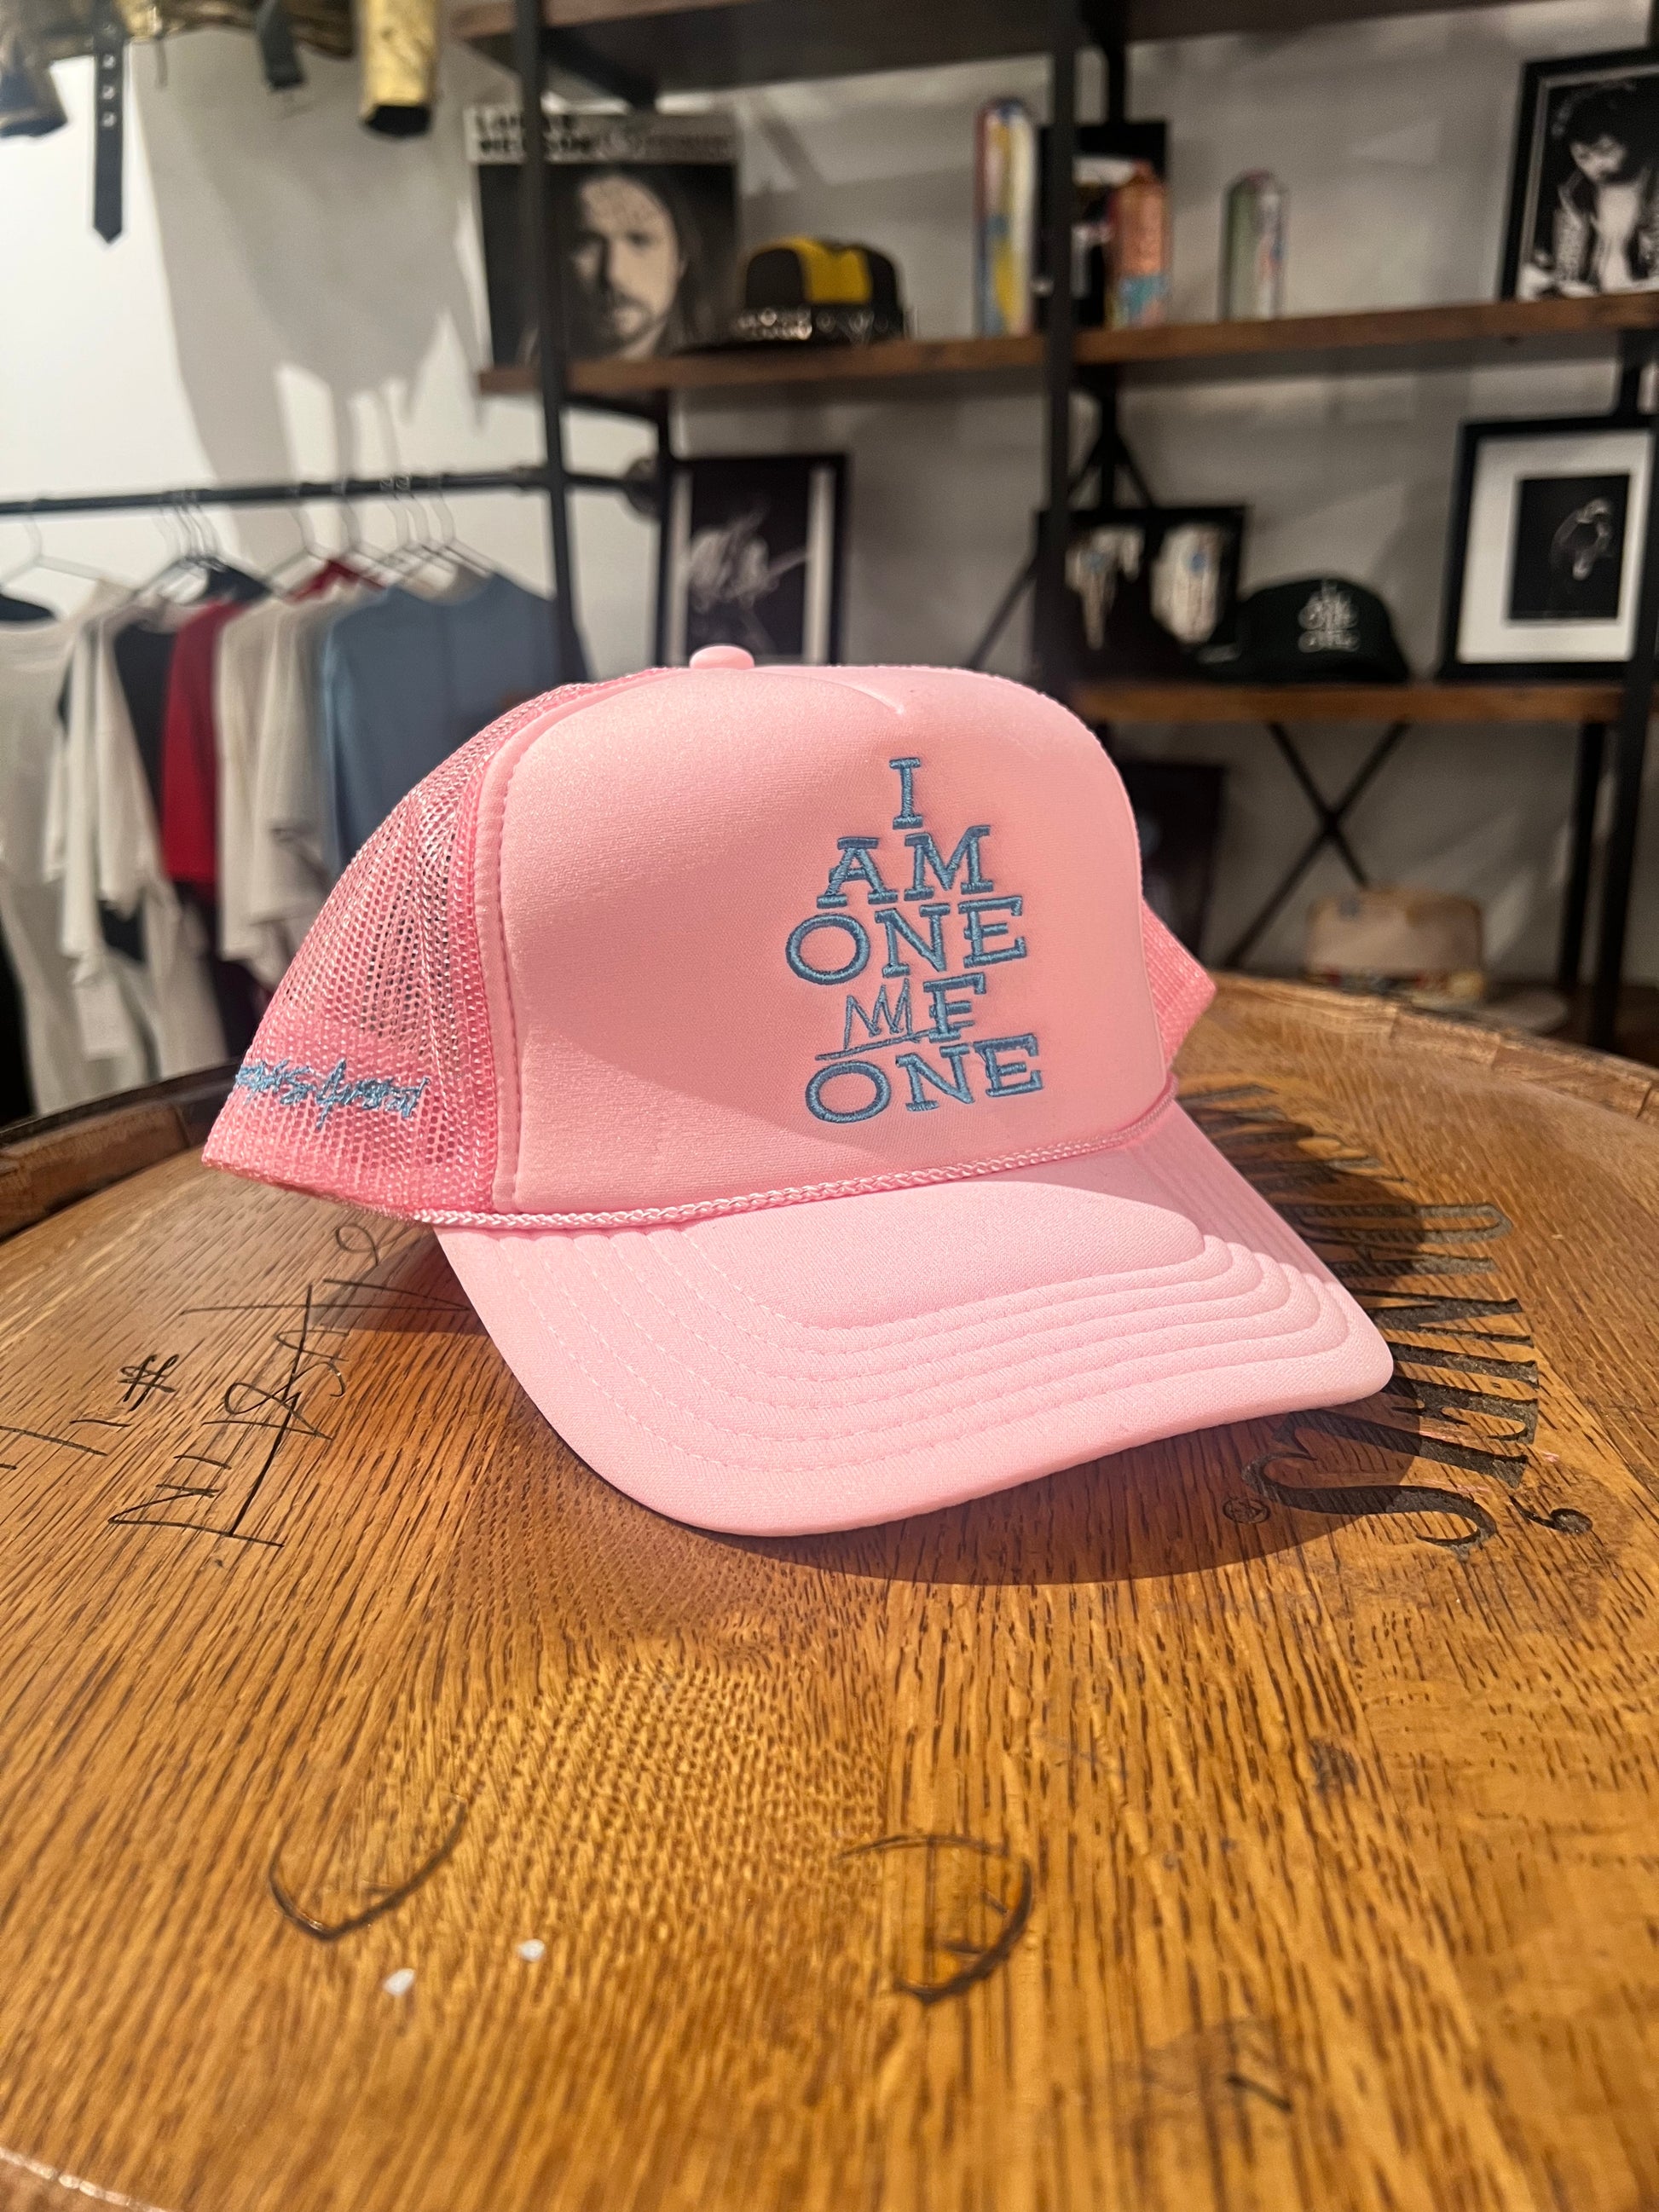 I AM ONE OF ONE Trucker Baby Pink